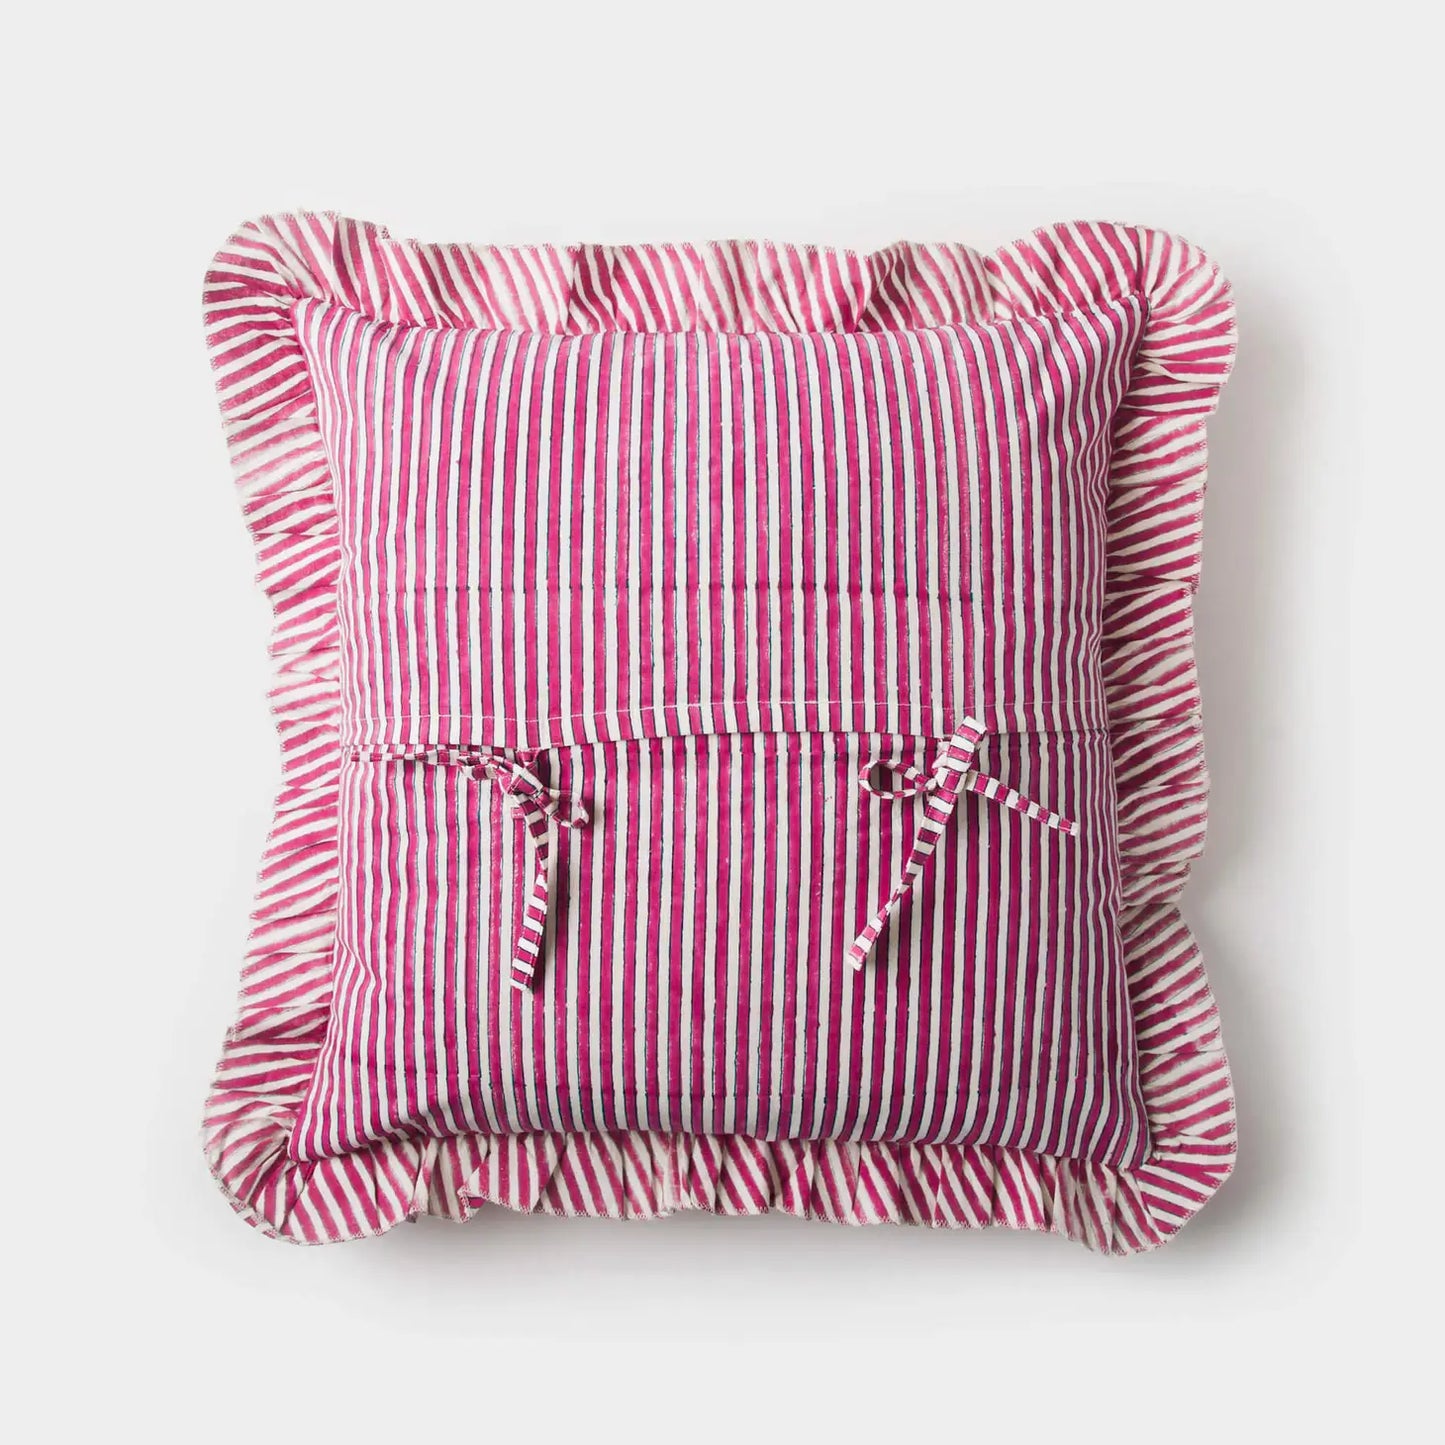 Candystripe Ruffled Square Pillow